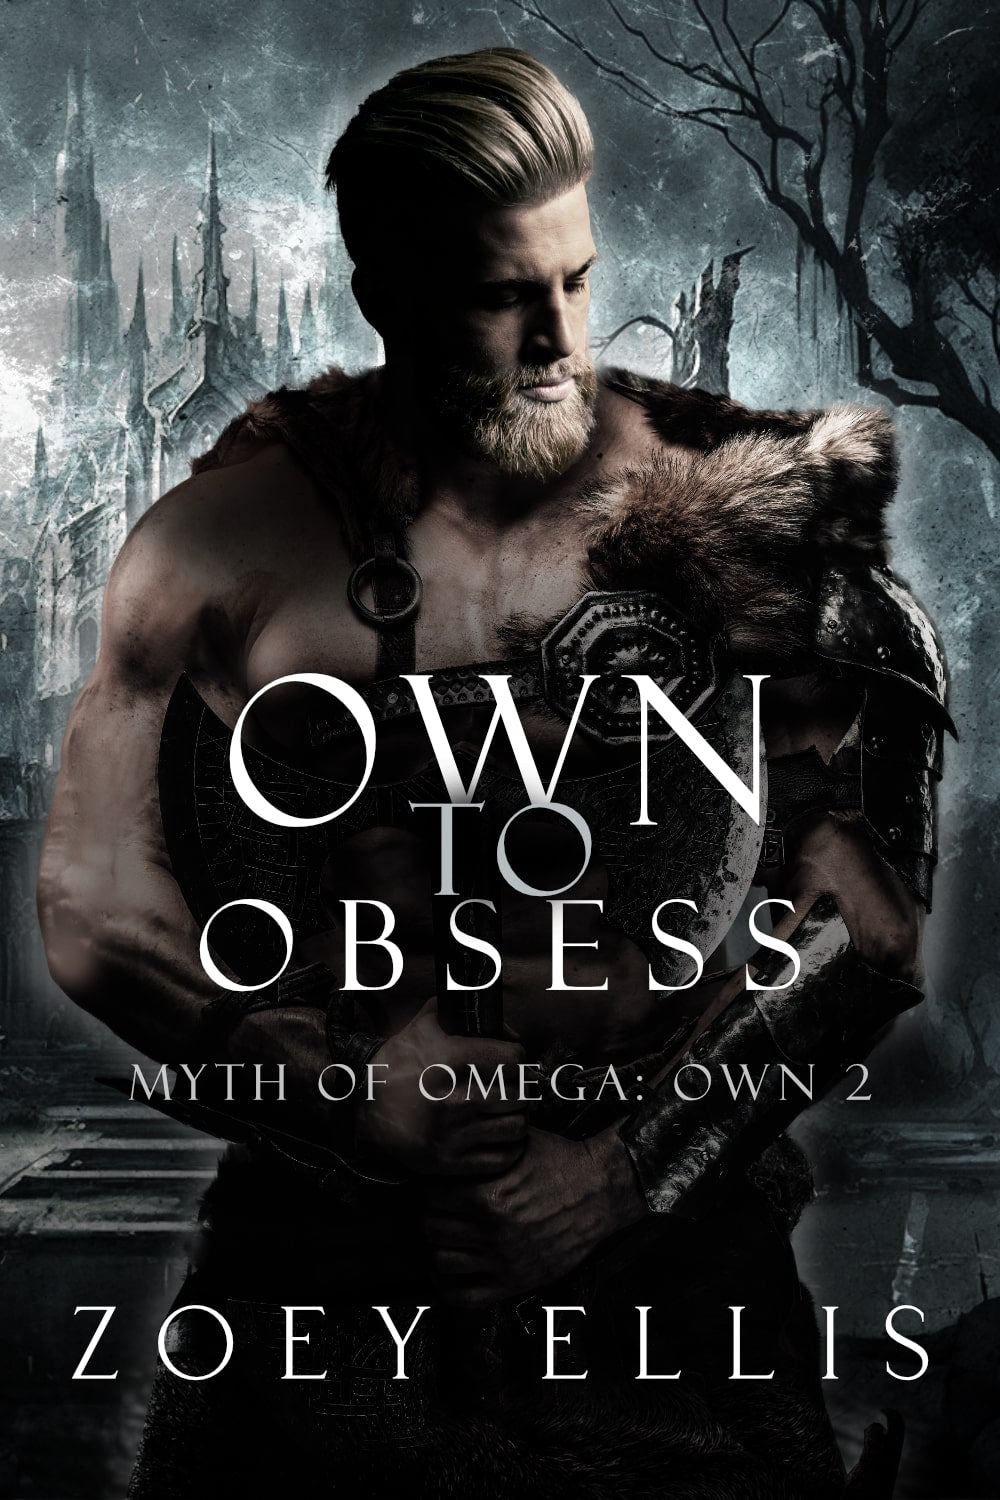 Own To Obsess (Myth of Omega: Own 2)